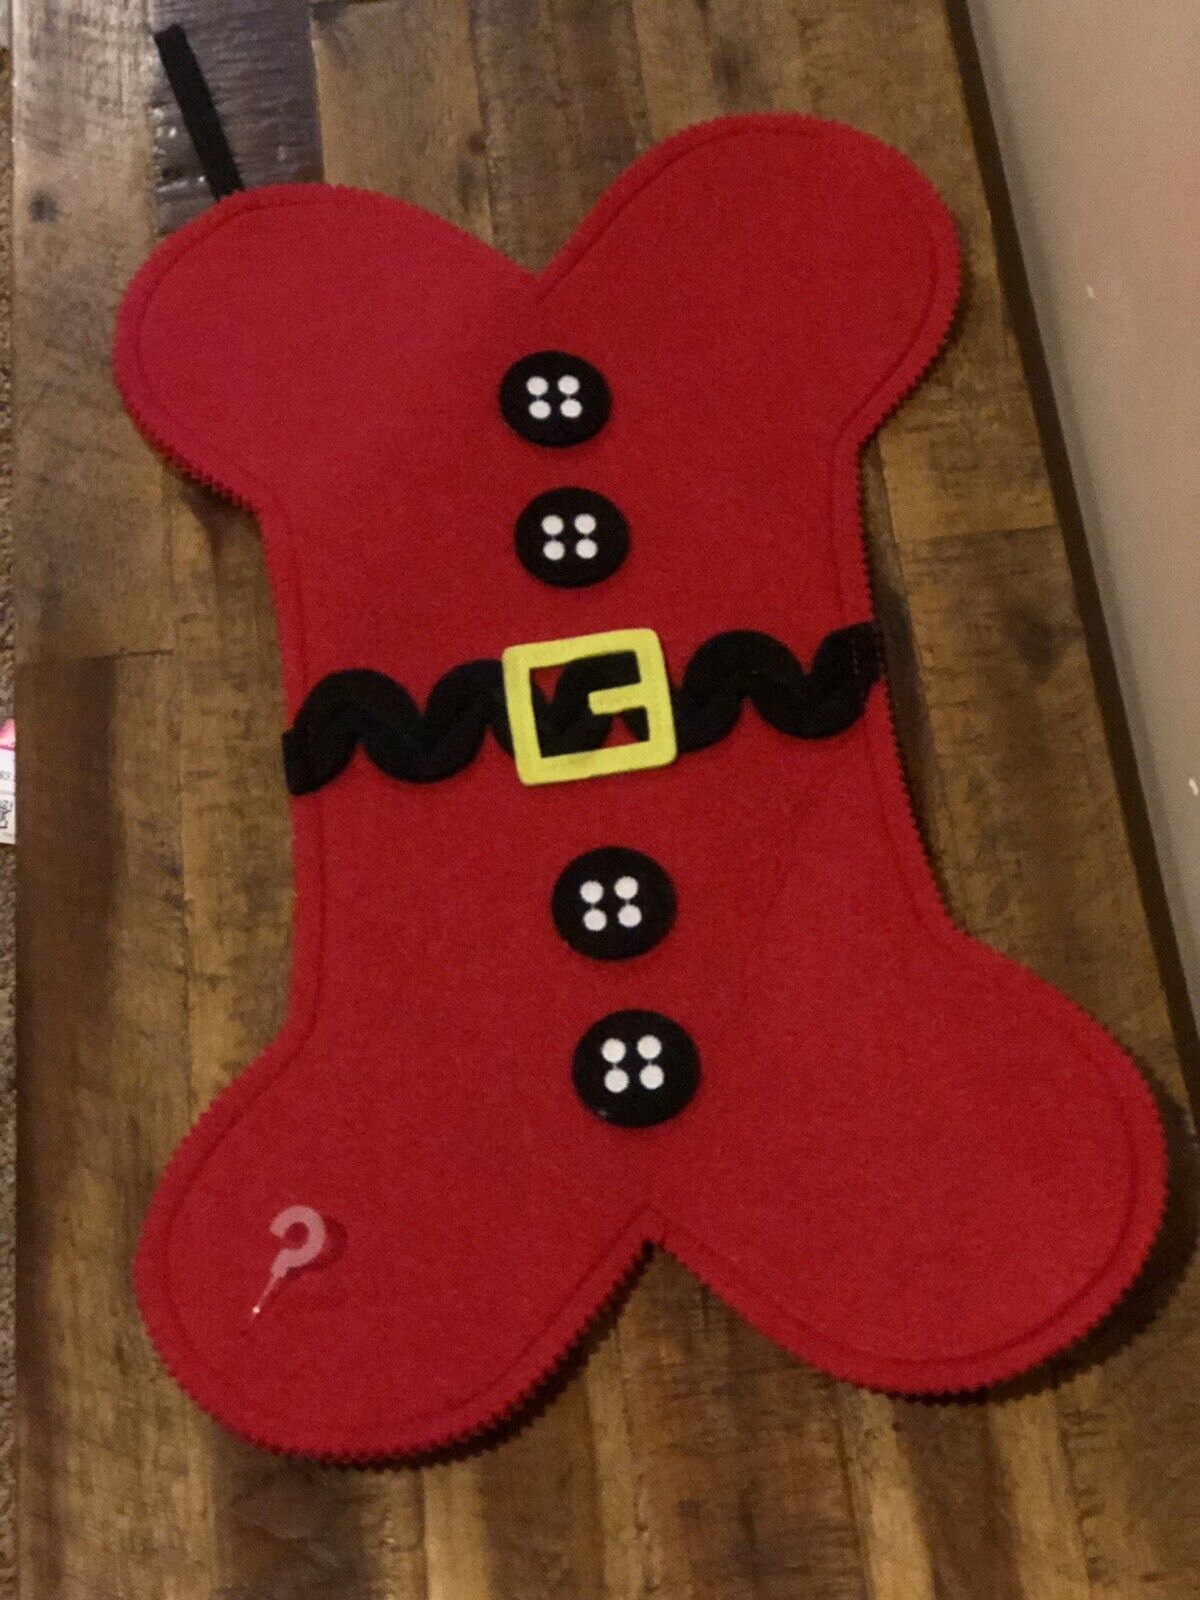 NEW LARGE HANDMADE RED DOG PAW STOCKING CHRISTMAS PET BONE SHAPED WITH BUTTONS